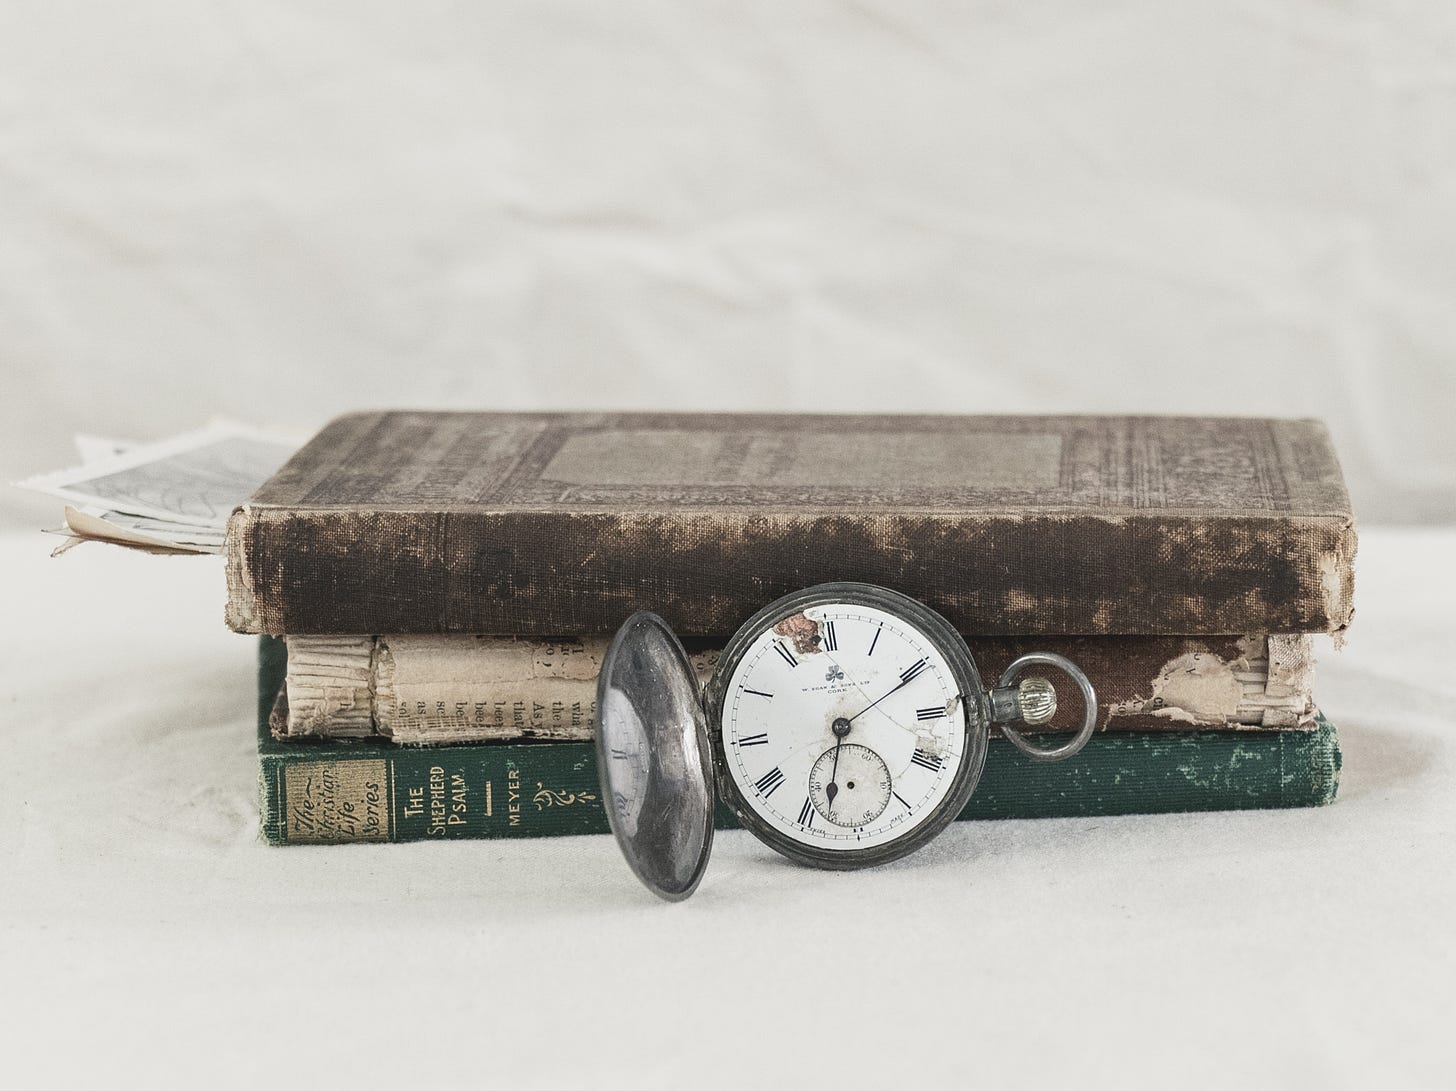 A cracked pocket watch leaning against a stack of old books